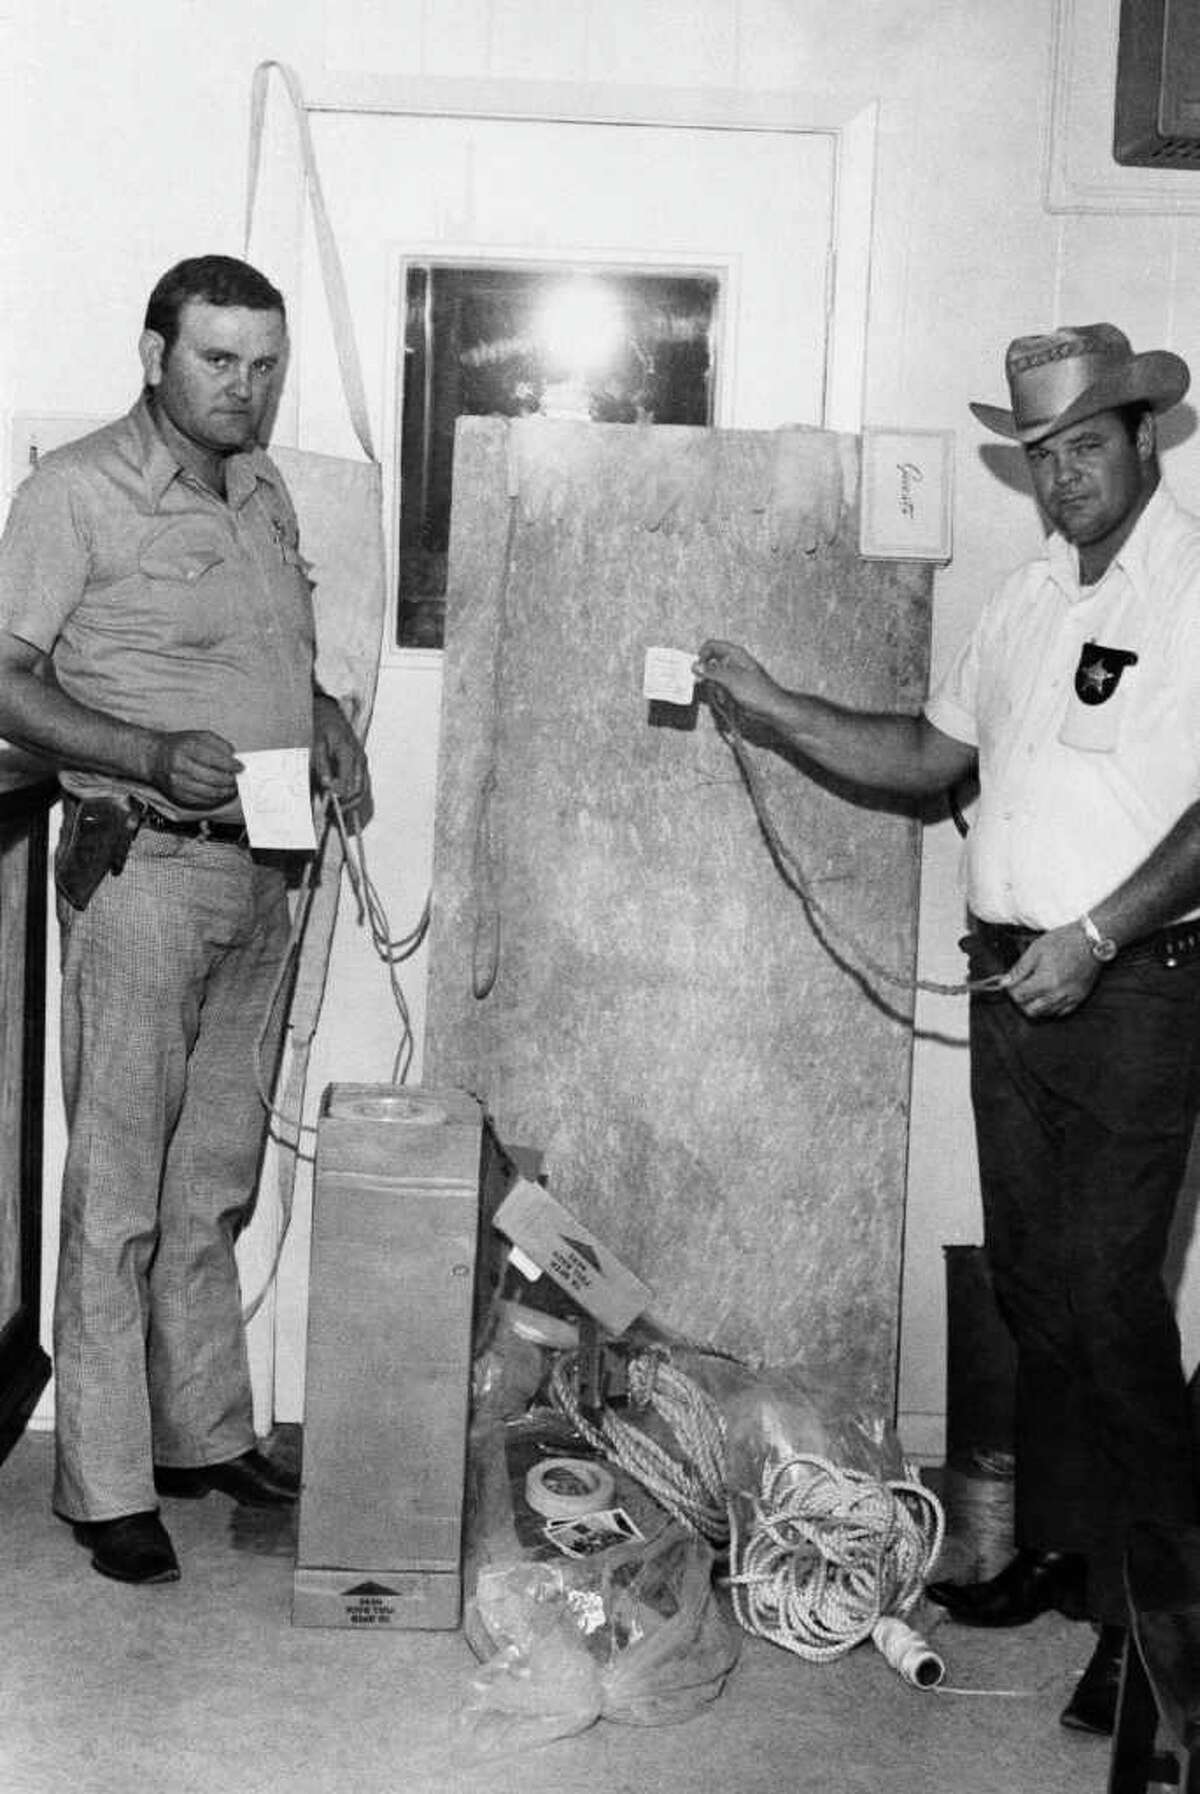 San Augustine County Sheriff deputies, Robert McCroskey, left and Charles Martin, display torture implements found inside and under a cabin on Aug.15, 1973, Broaddus, Texas. The cabin was owned by the parents of Dean Corll, allegedly the central figure in the nations worst mass slaying case. The items included three pairs of plastic gloves, shovels, sacks of lime, rope and a torture board. Owners of cabins nearby say Elmer Wayne Henley, 17, and David Owen Brooks, 18, also alleged connected with the slayings were frequent visitors at the cabin. (AP Photo)